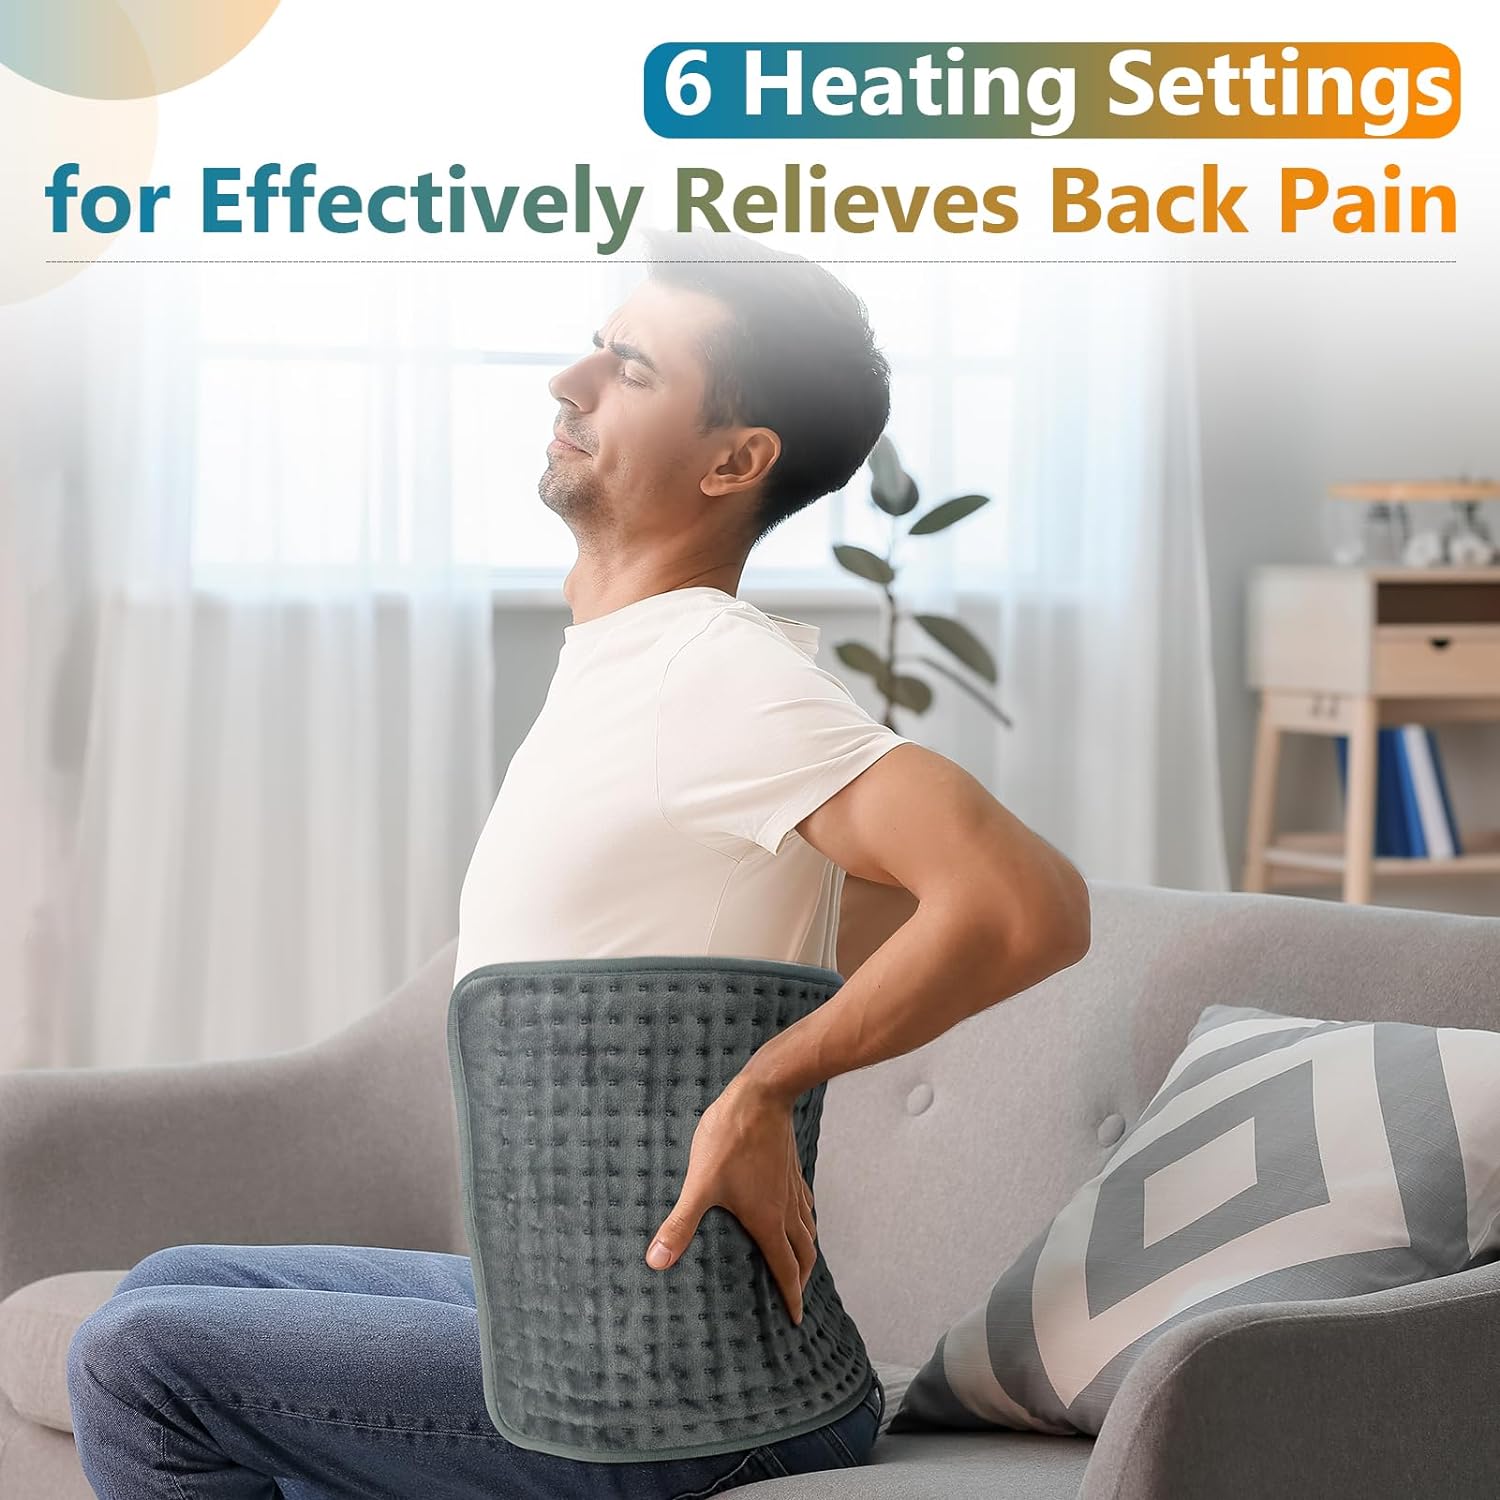 Comfytemp Heating Pad for Back Pain & Cramps Relief, FSA HSA Eligible Electric Heating Pads Large